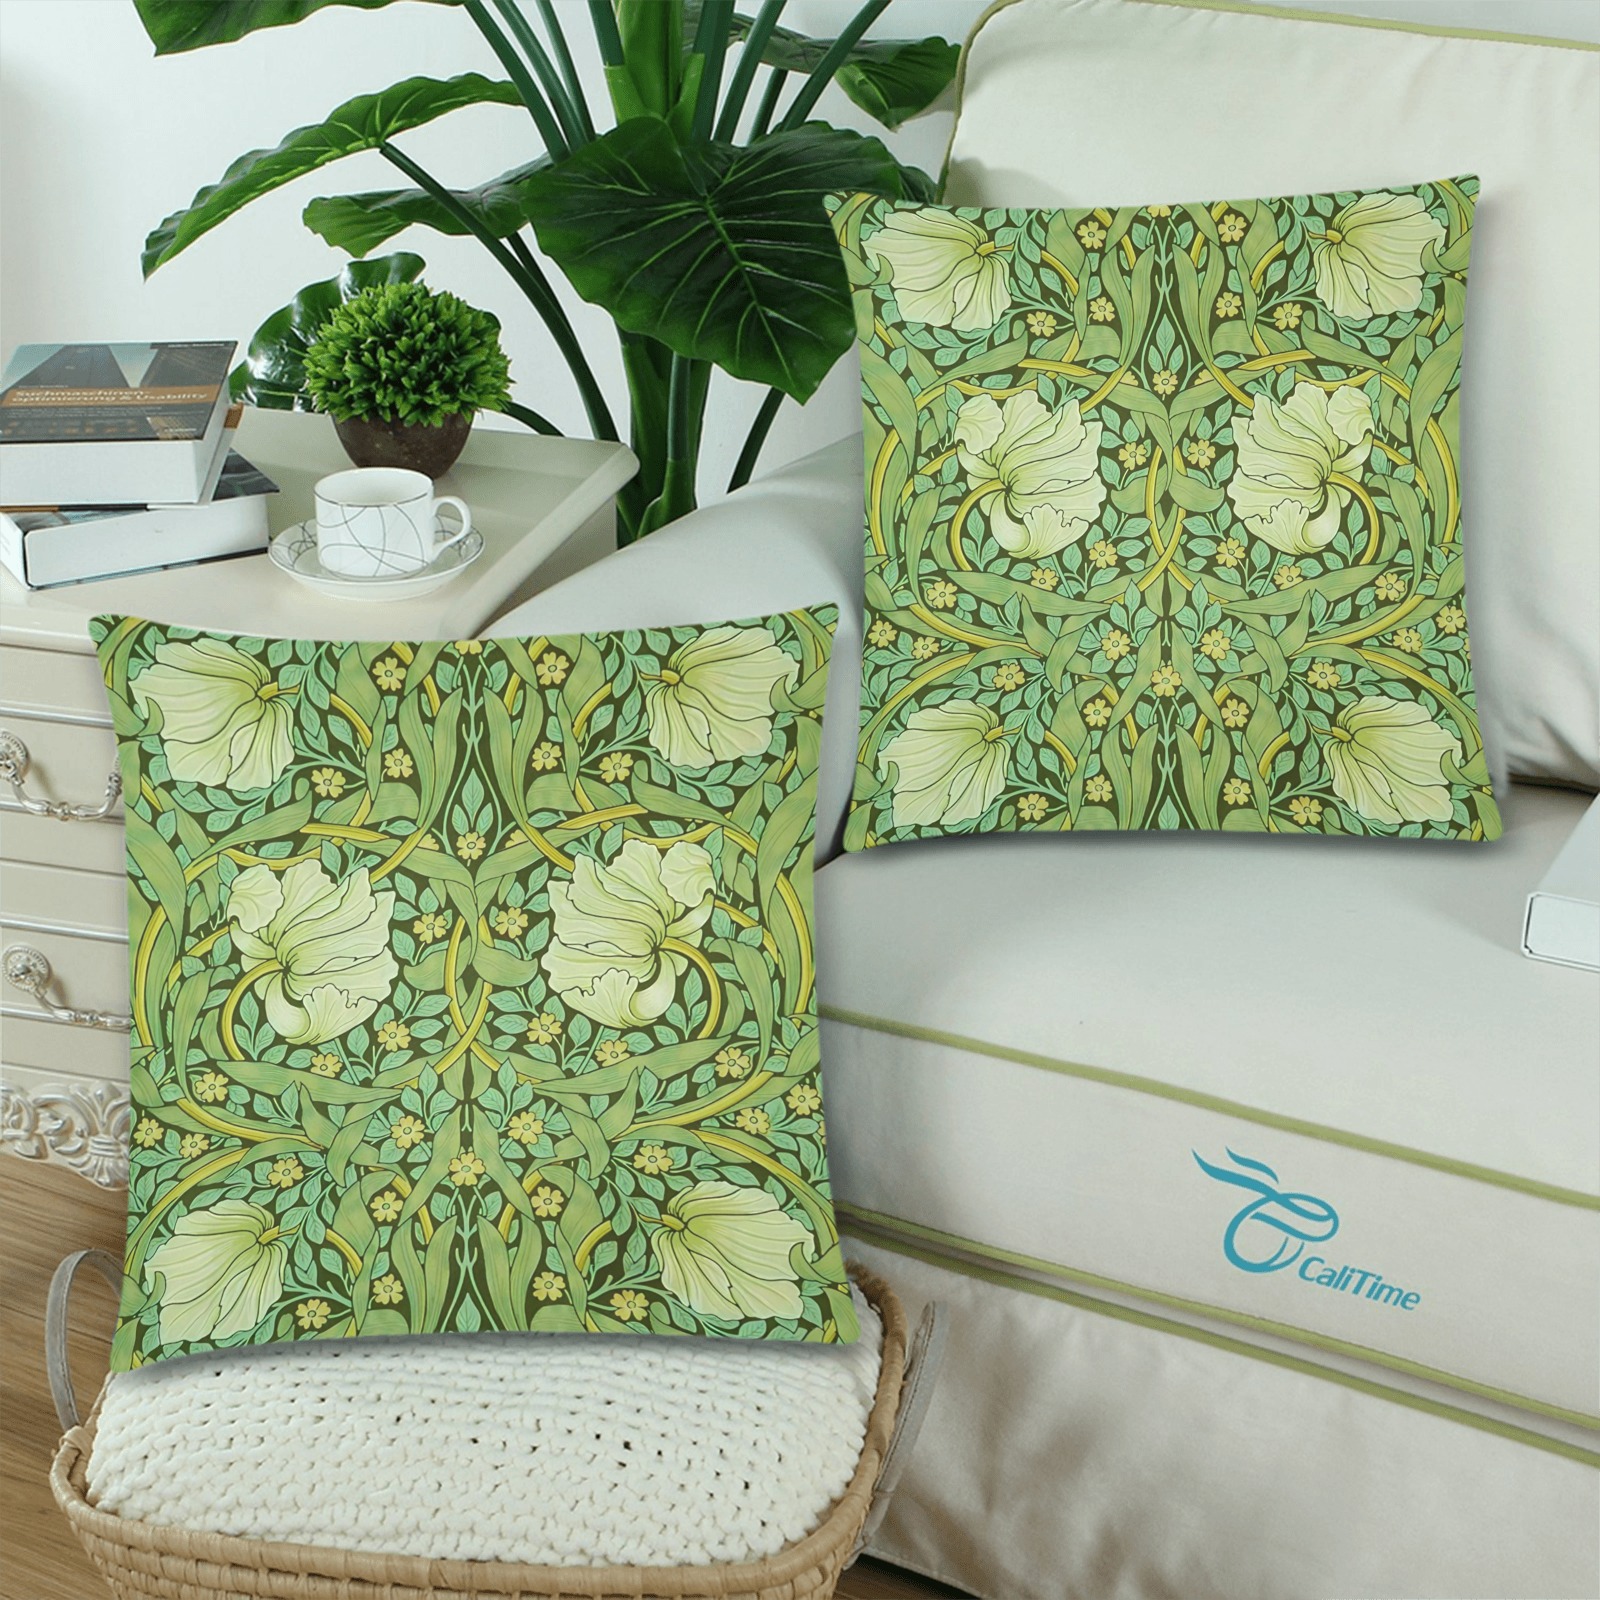 William Morris - Pimpernel Custom Zippered Pillow Cases 18"x 18" (Twin Sides) (Set of 2)